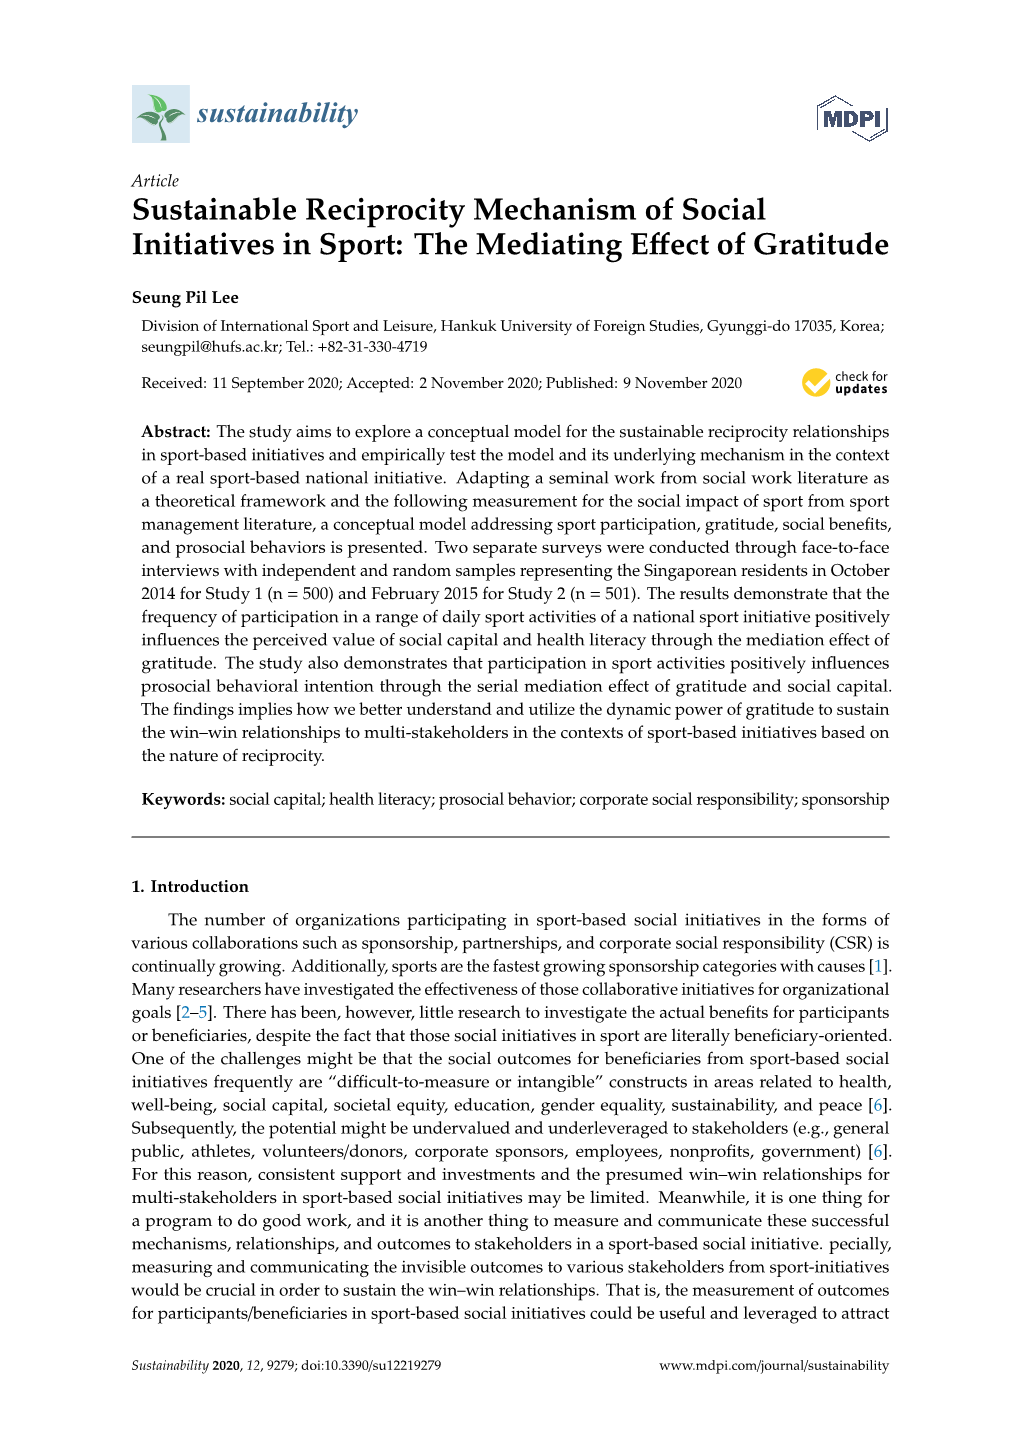 Sustainable Reciprocity Mechanism of Social Initiatives in Sport: the Mediating Eﬀect of Gratitude